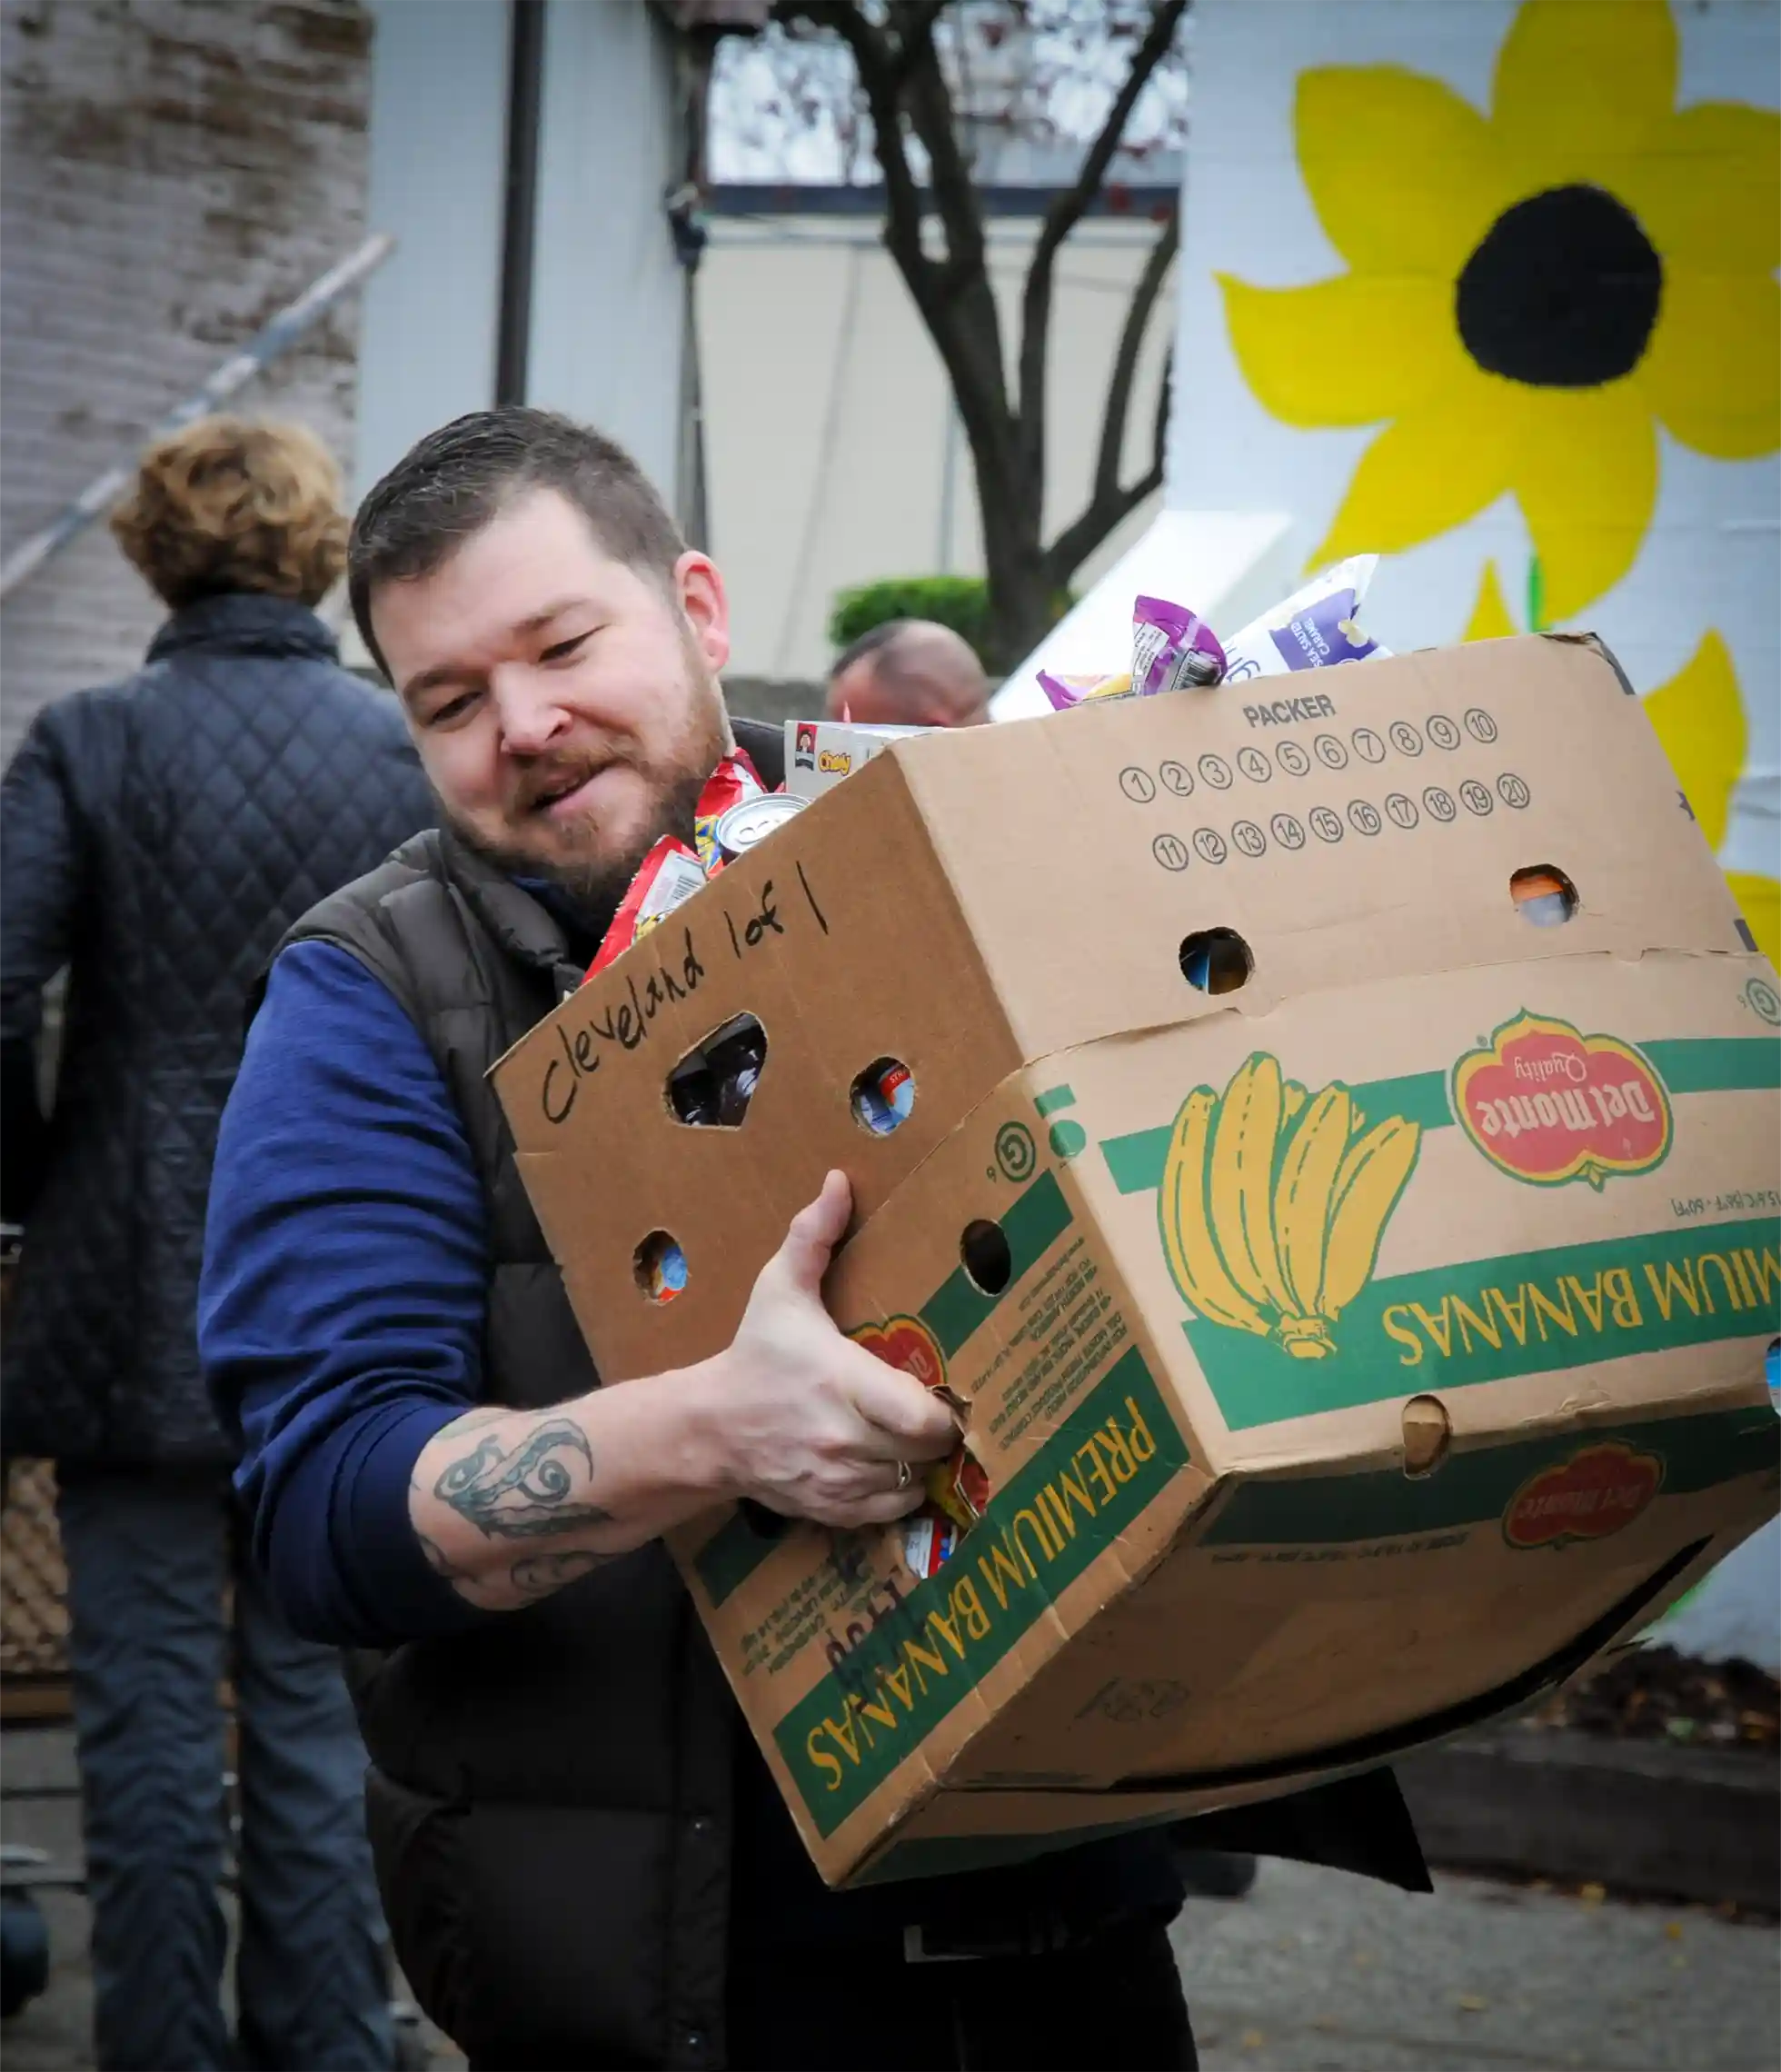 A volunteer carrying a box of food